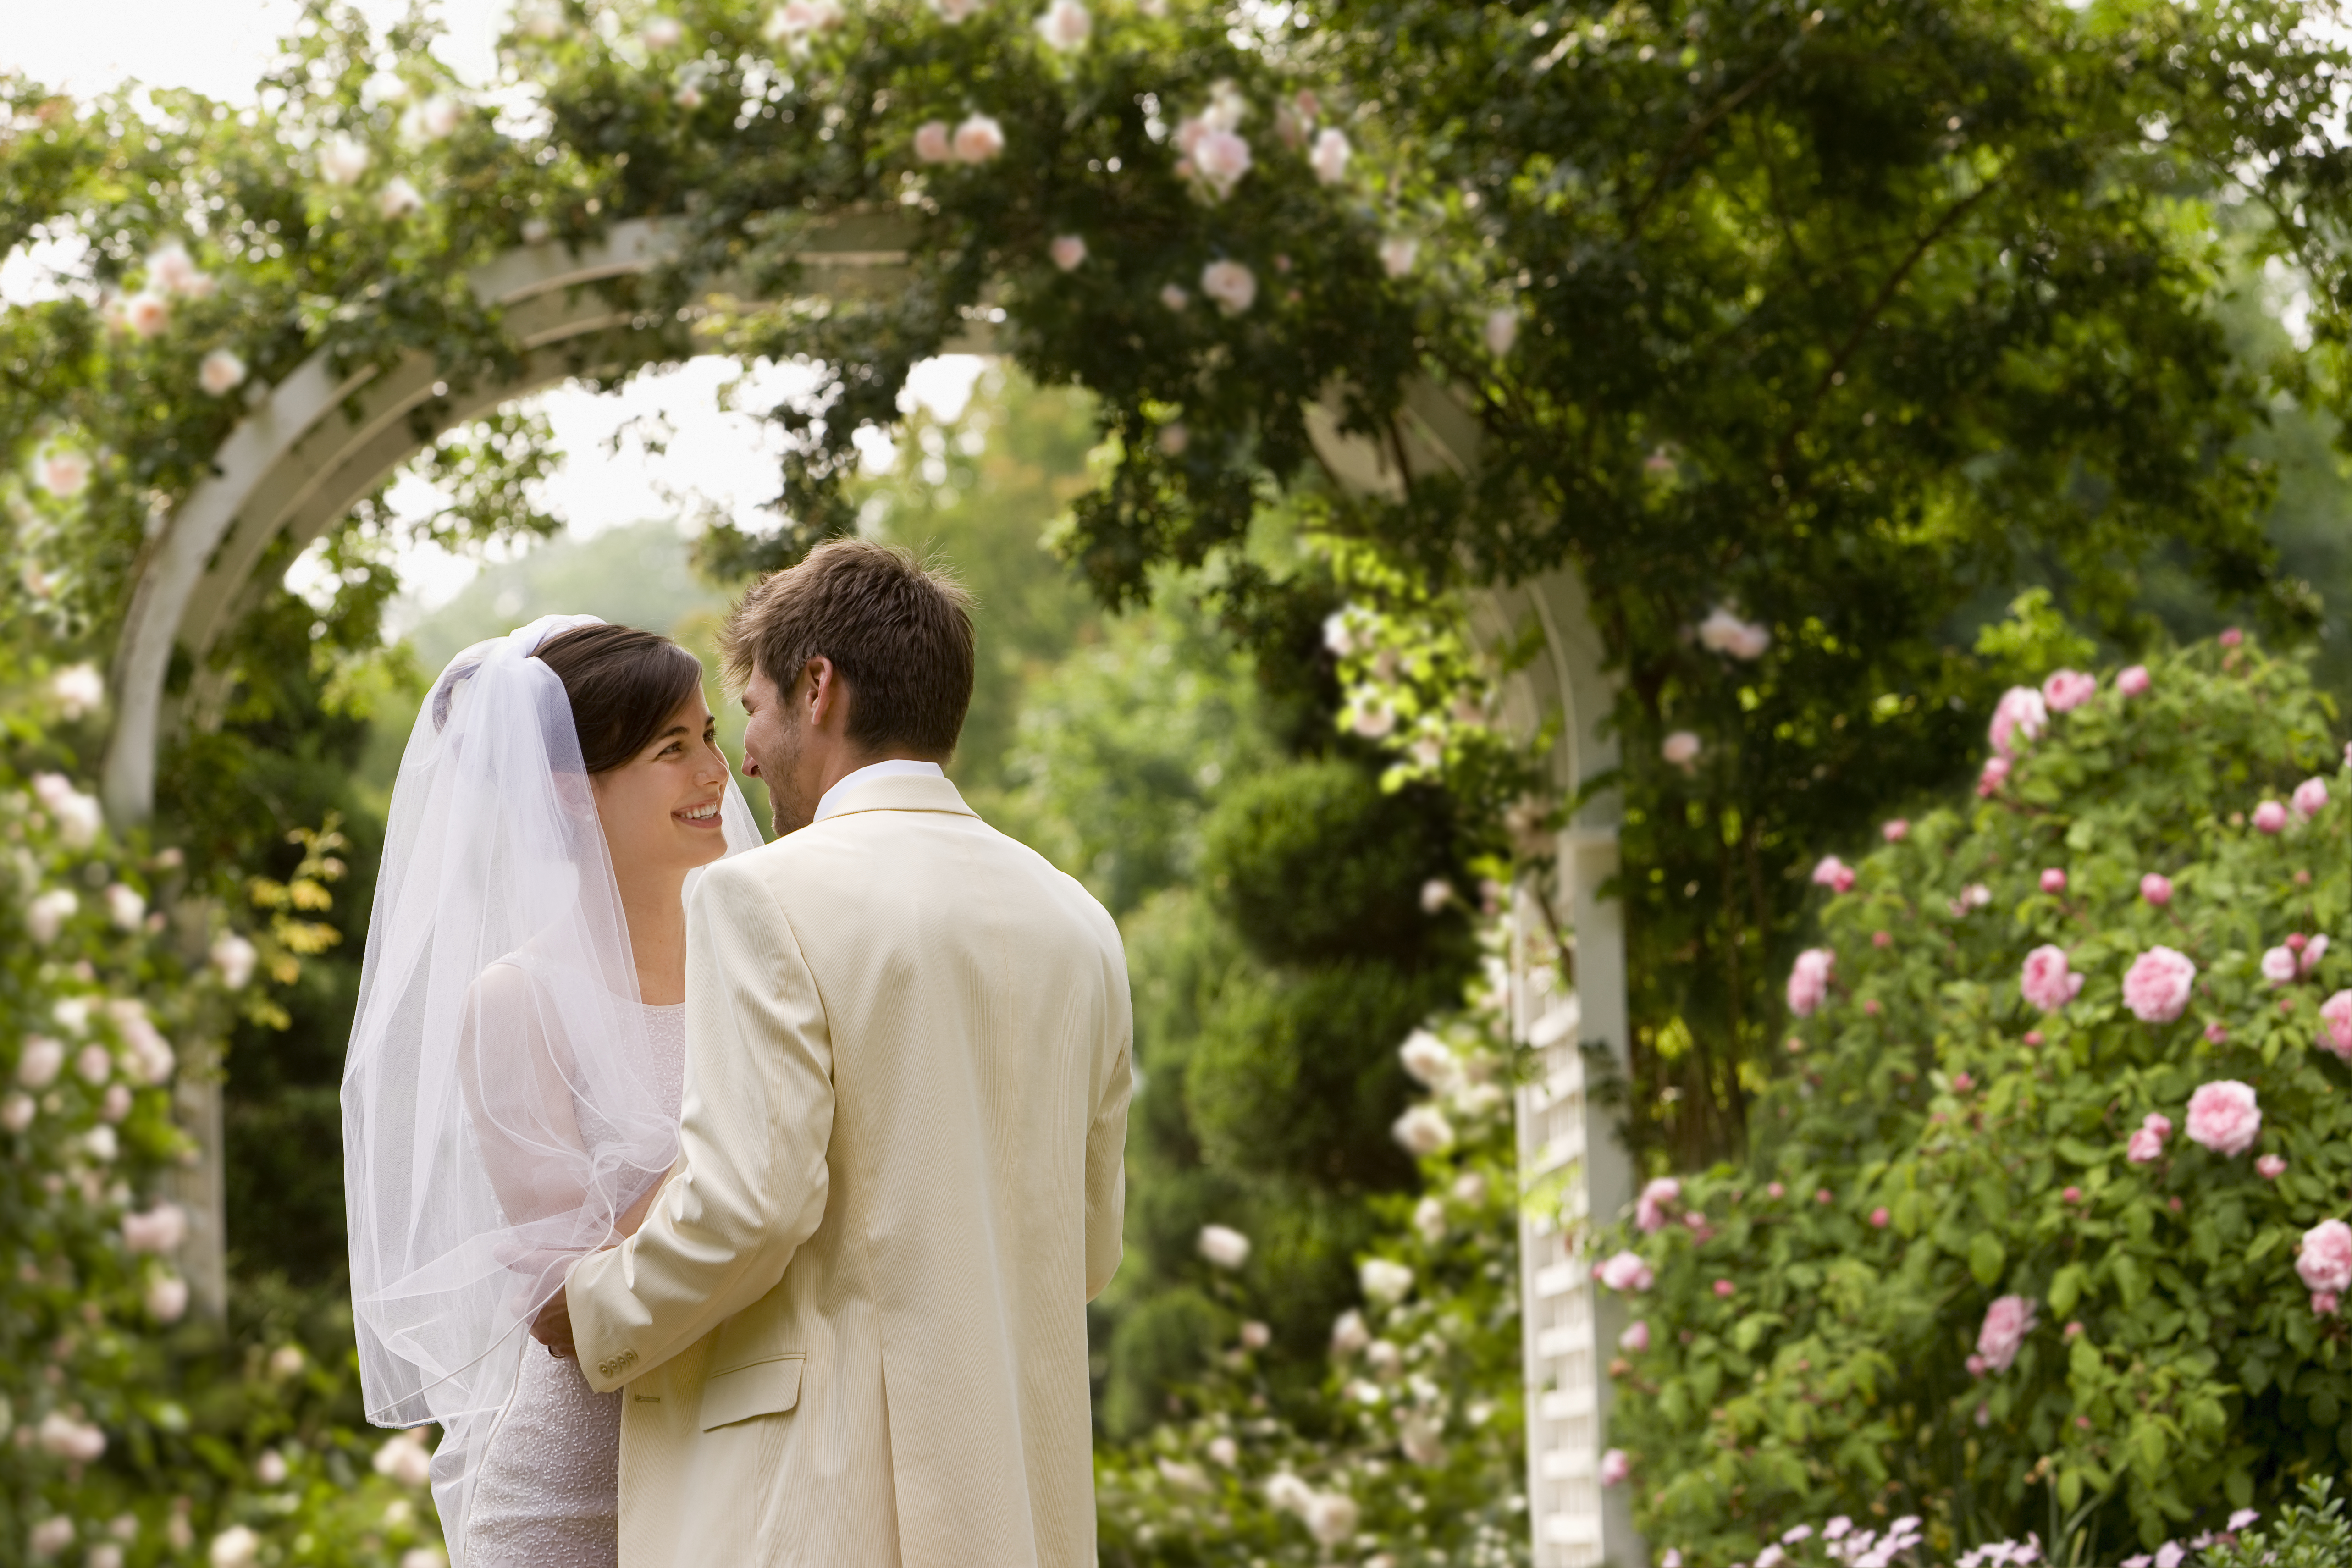 Young Couple Getting Married in Garden | Source: Getty Images